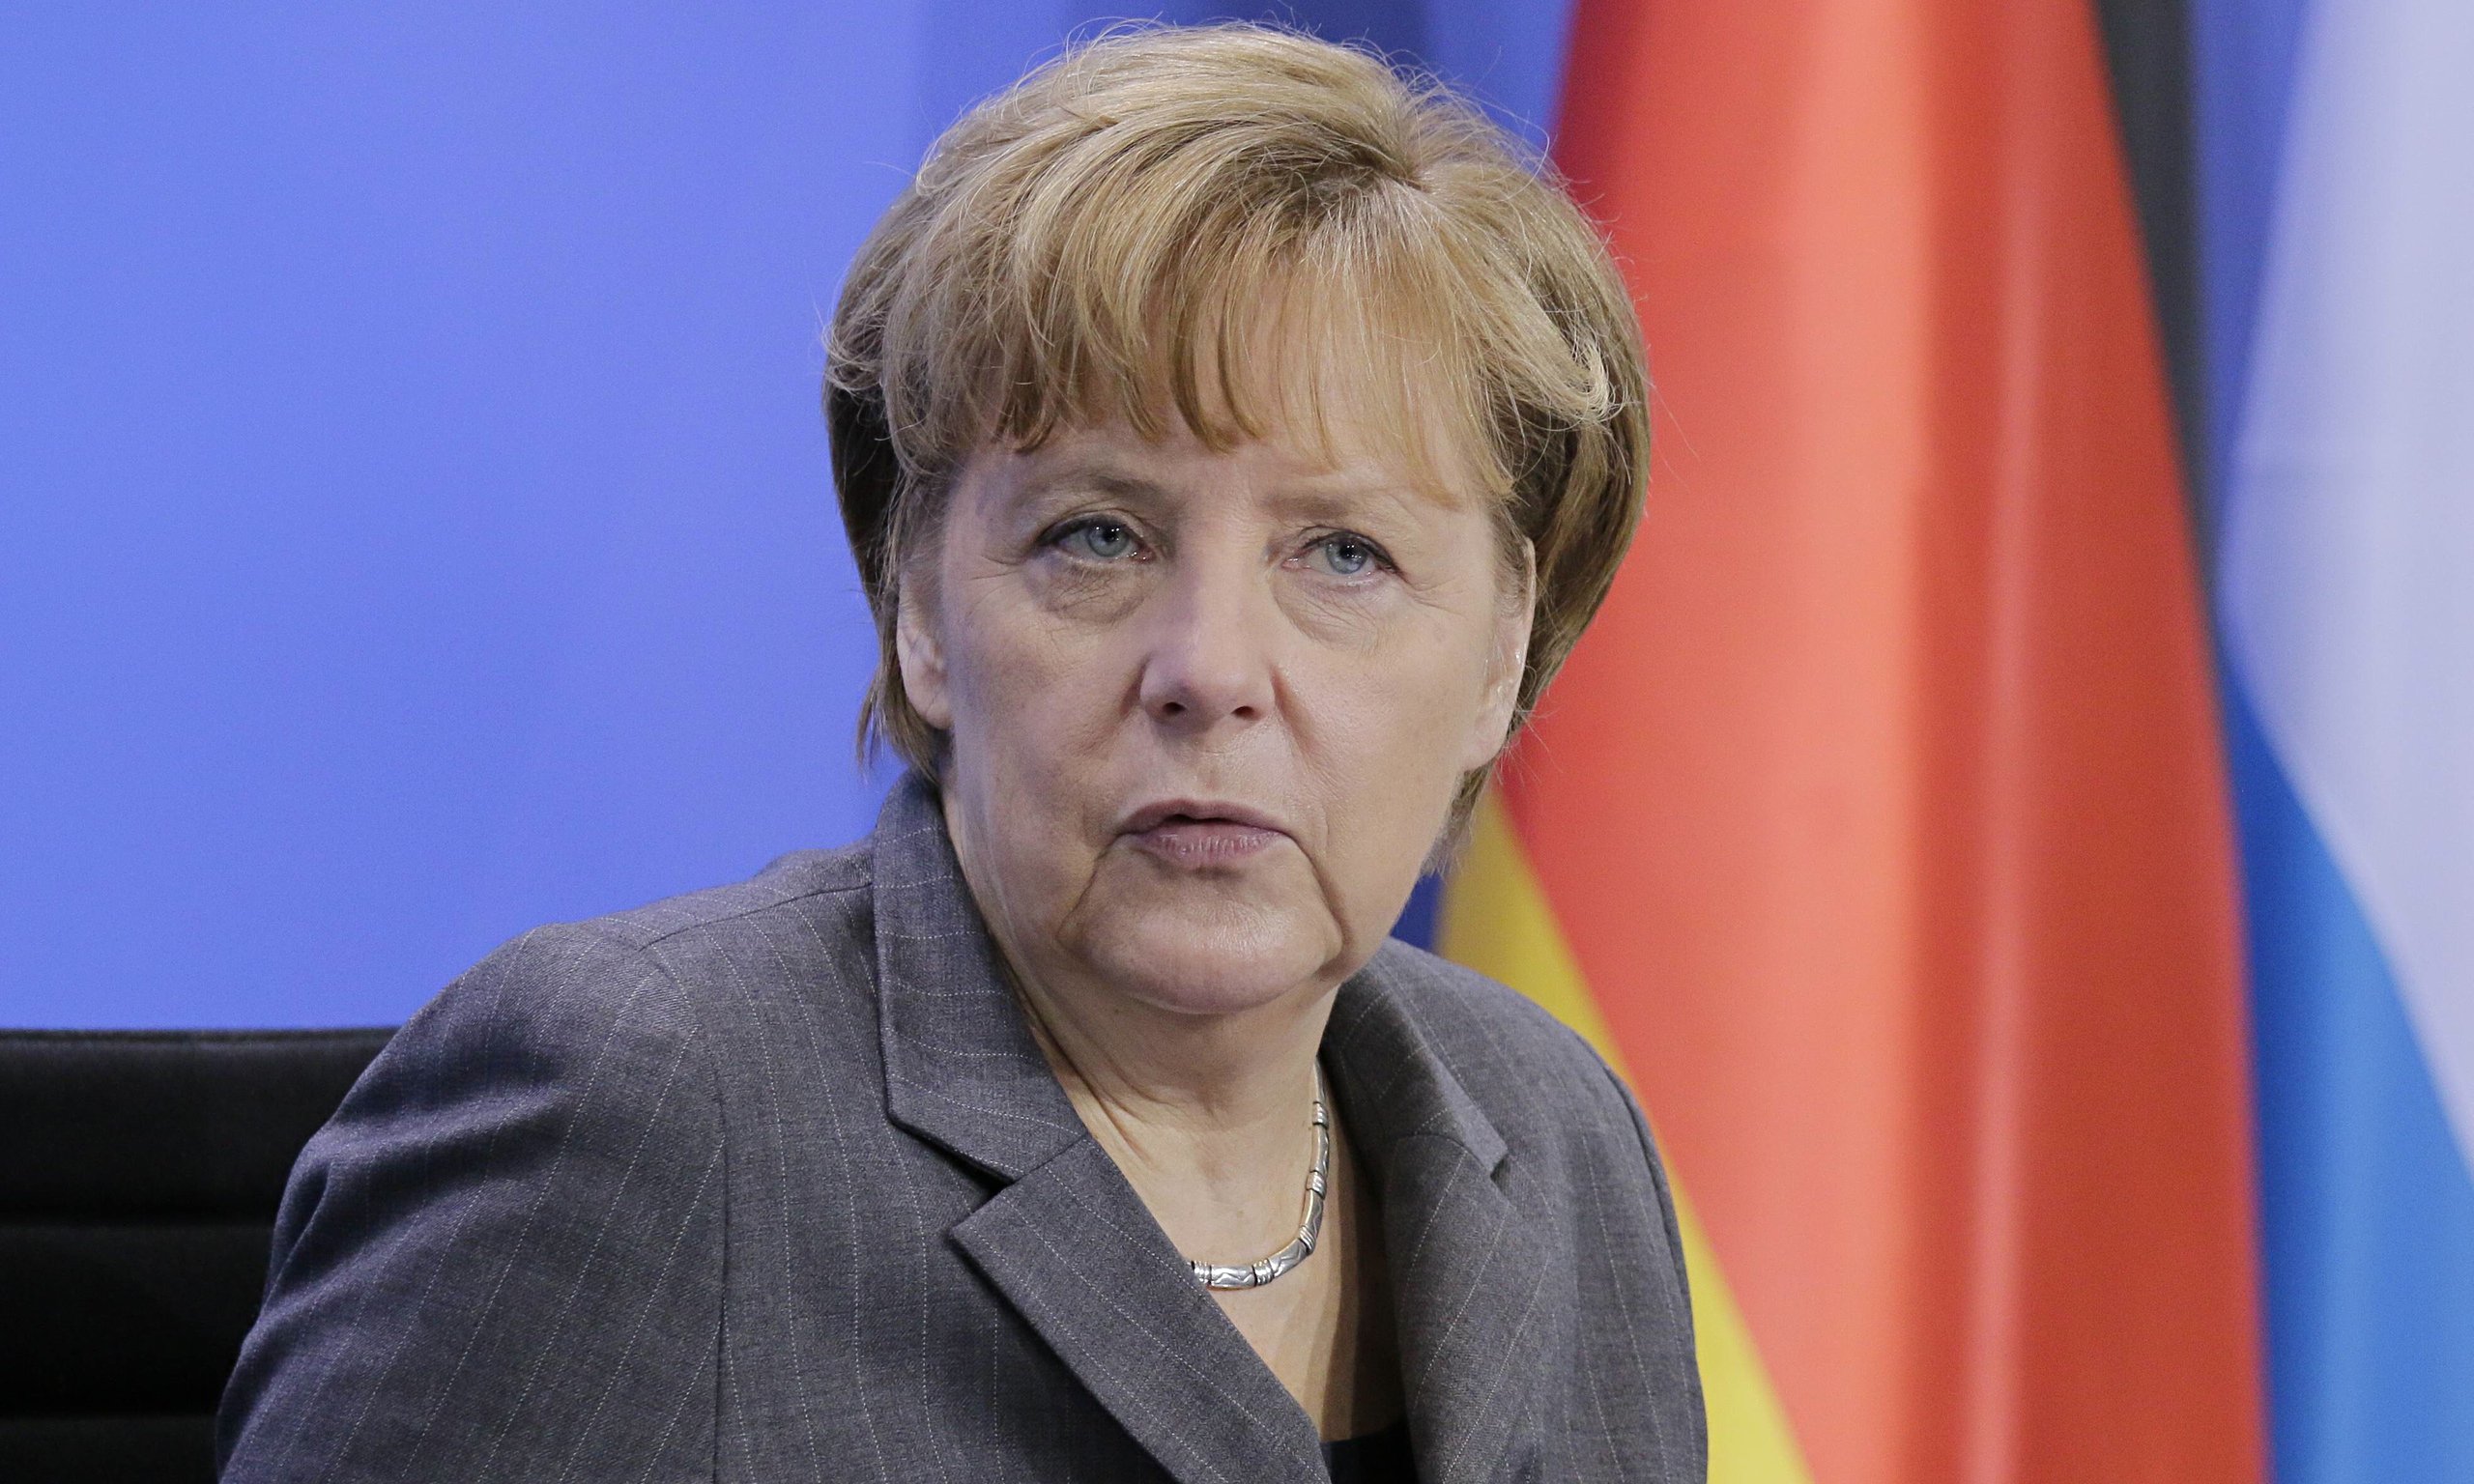 Merkel expects tough talks as coalition negotiations approach end